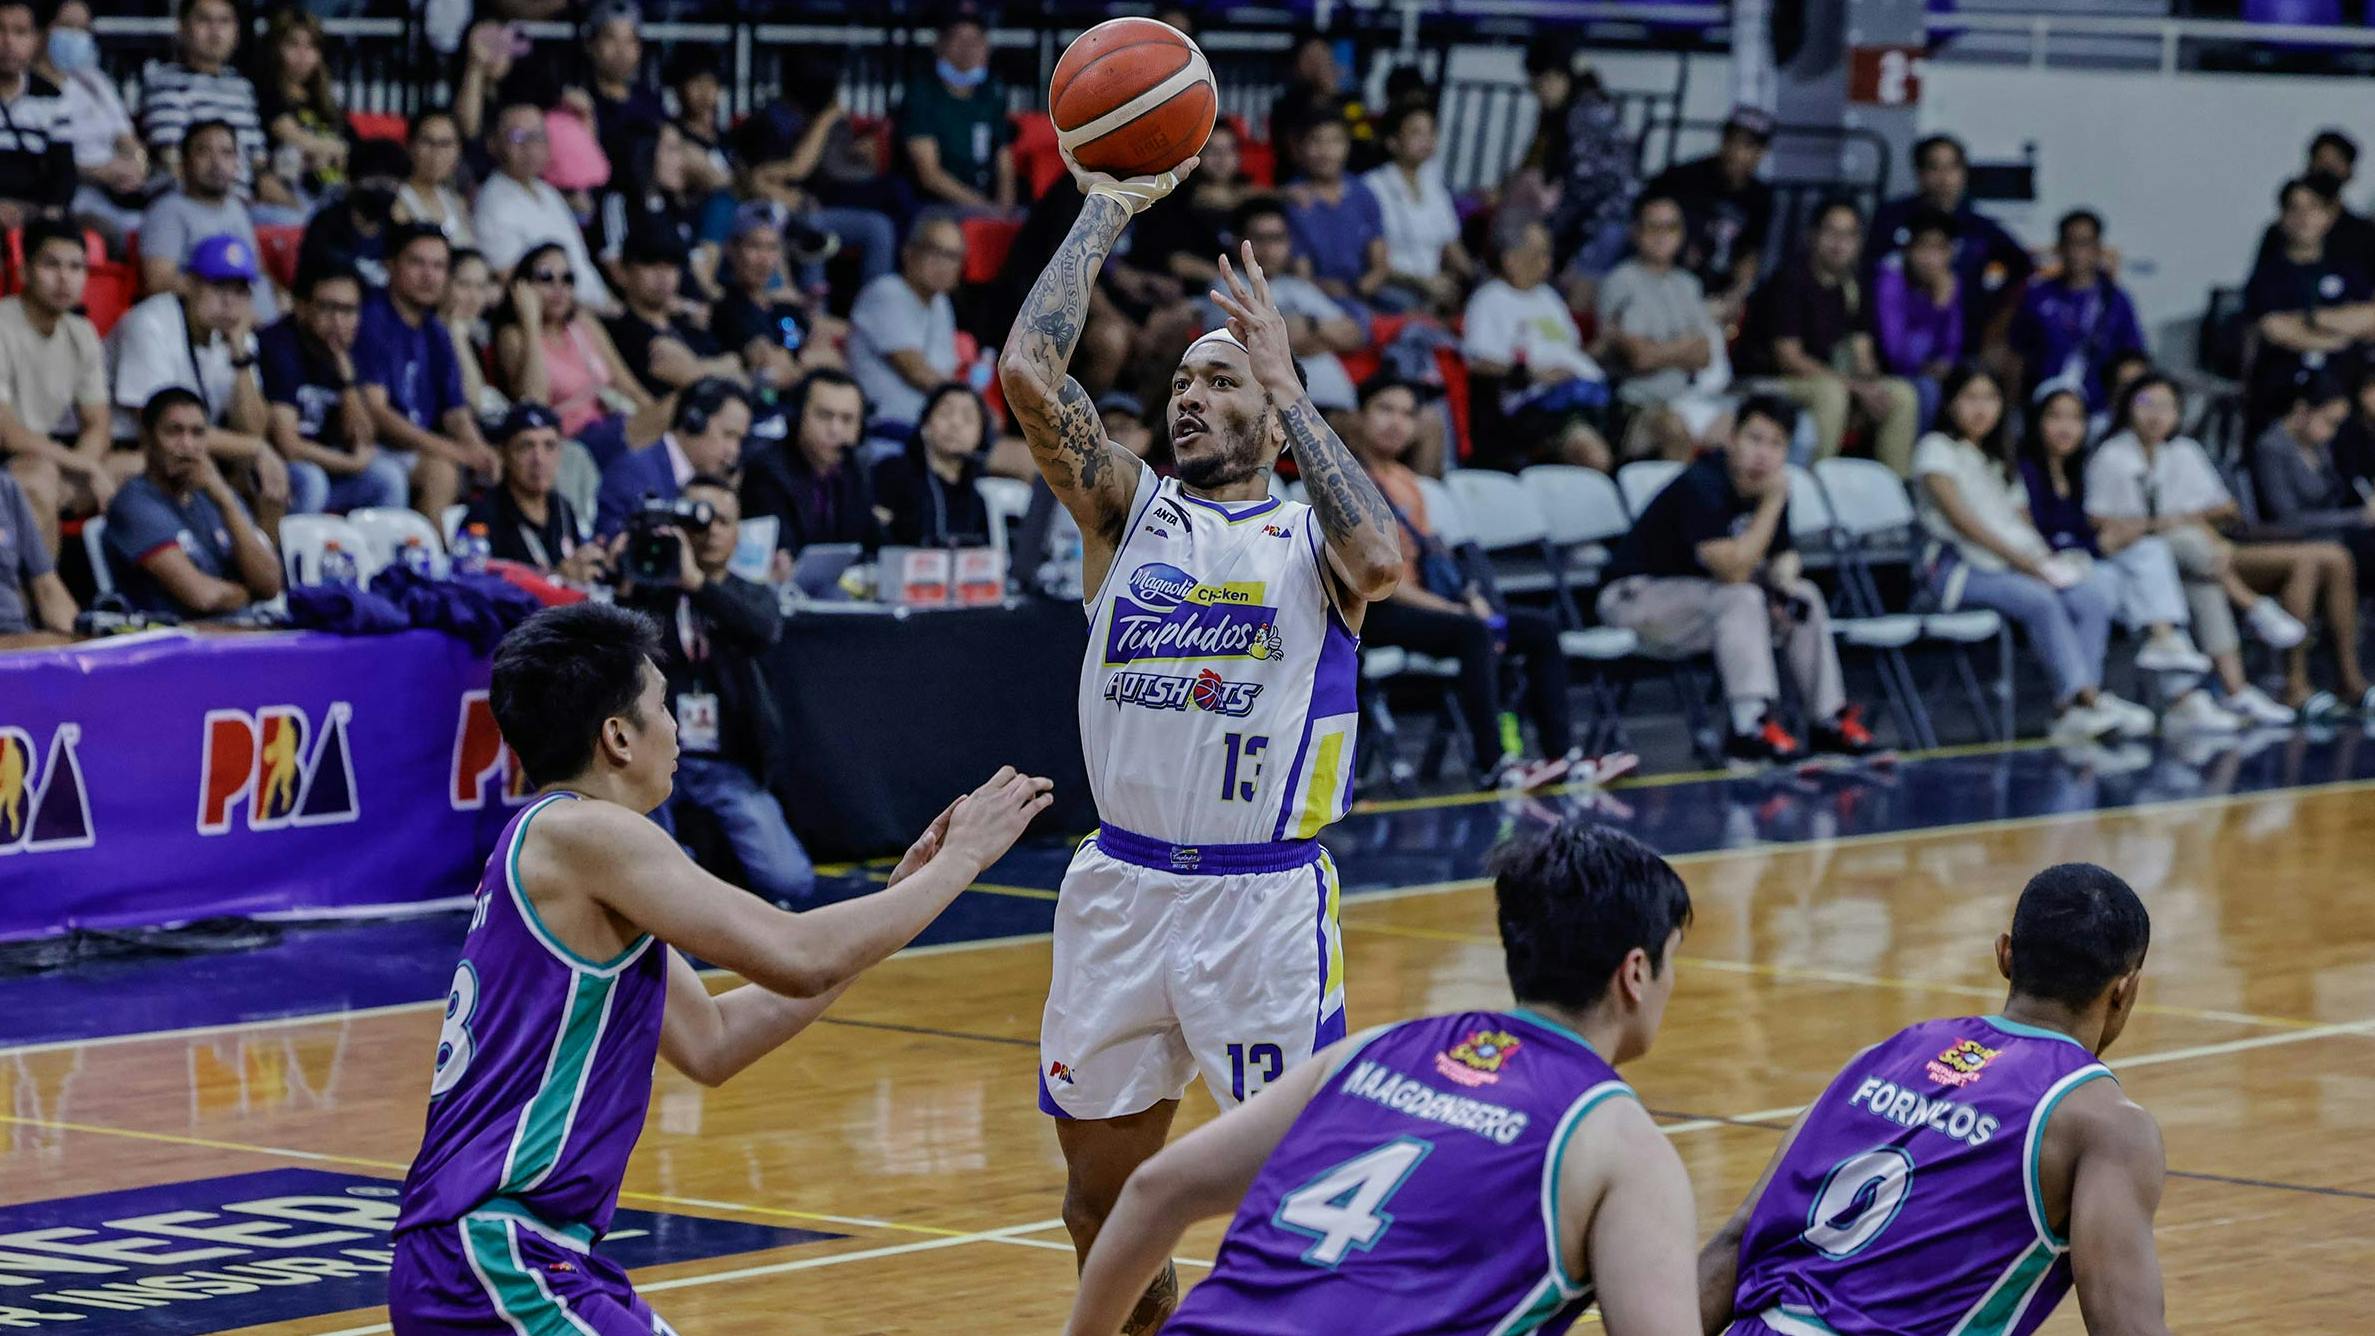 PBA: Magnolia opens Philippine Cup campaign with romp over listless Converge